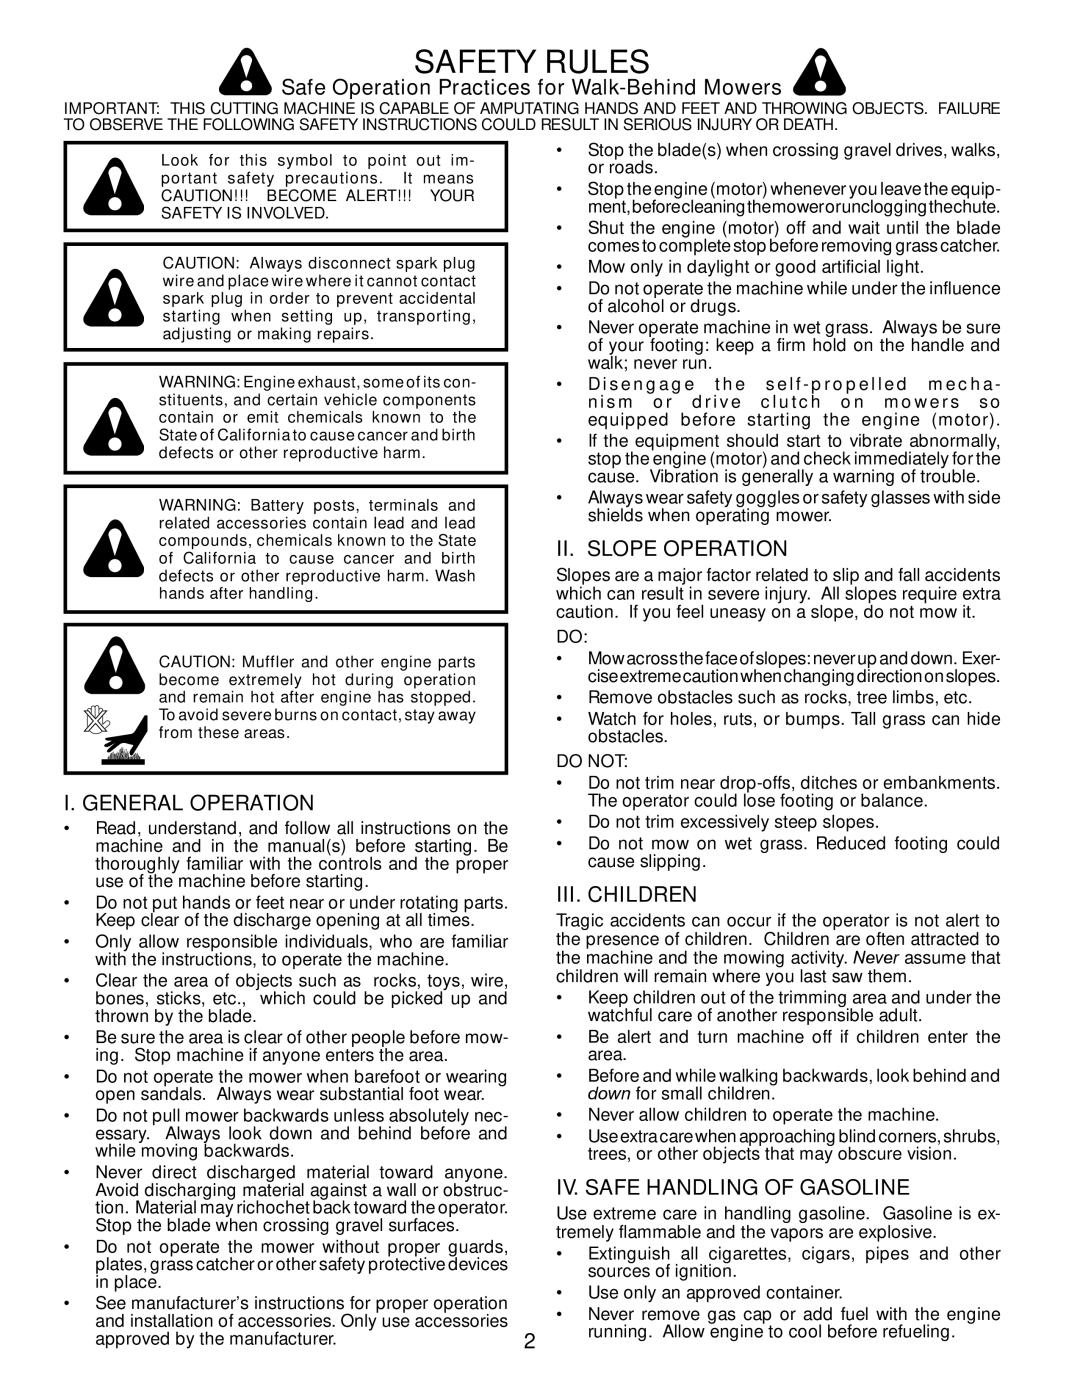 Husqvarna 96143004500 Safety Rules, Safe Operation Practices for Walk-Behind Mowers, Ii. Slope Operation, Iii. Children 